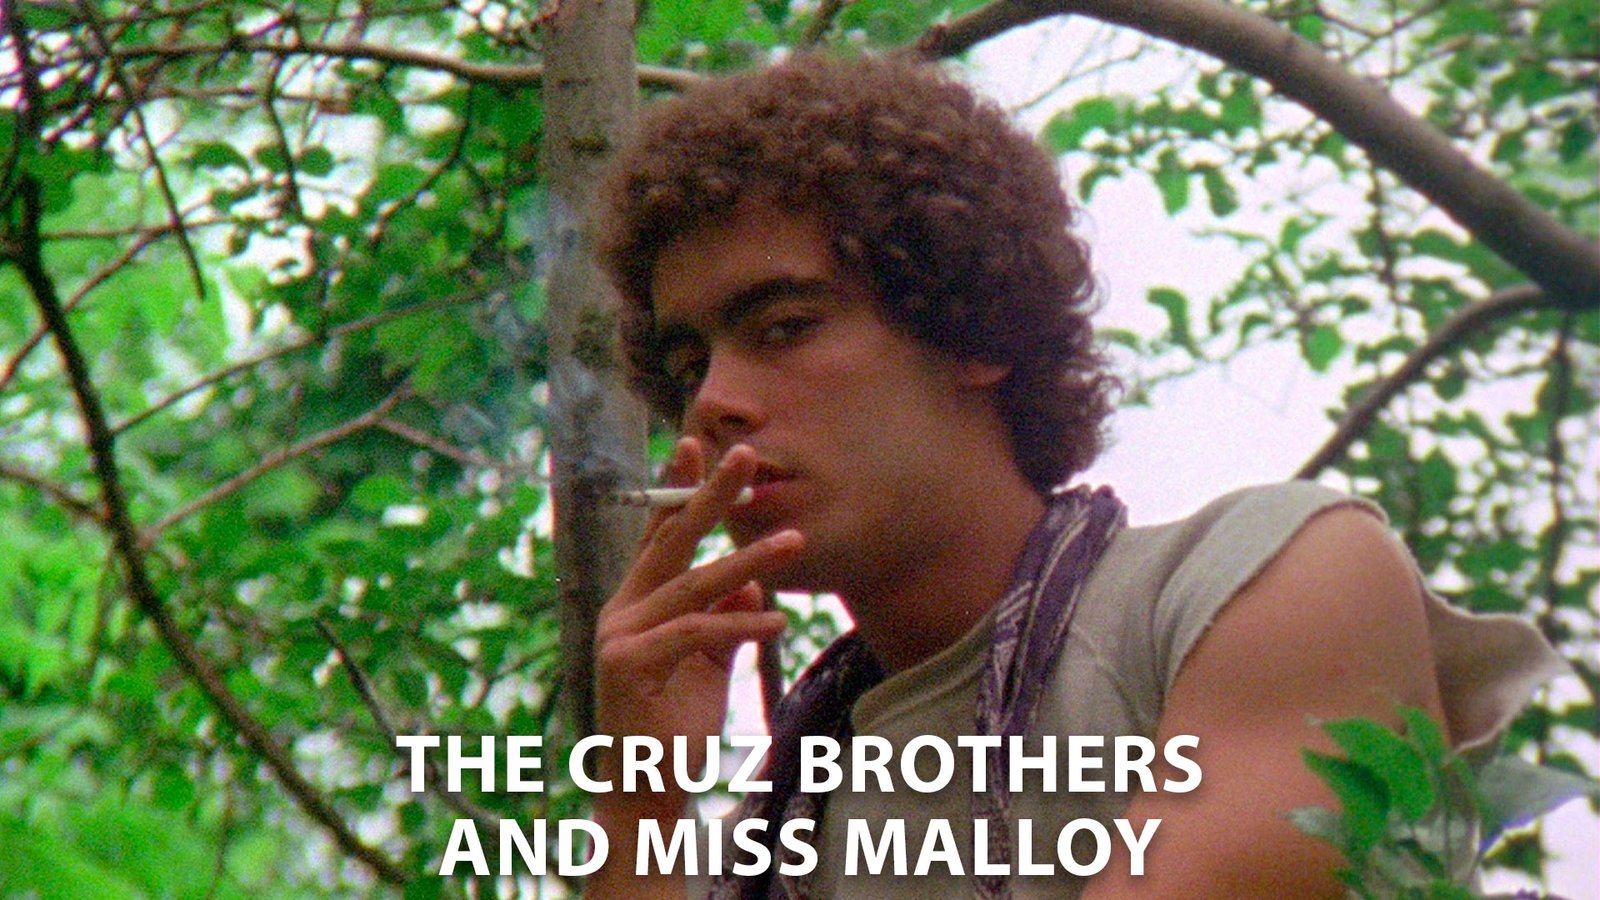 The Cruz Brothers and Miss Malloy